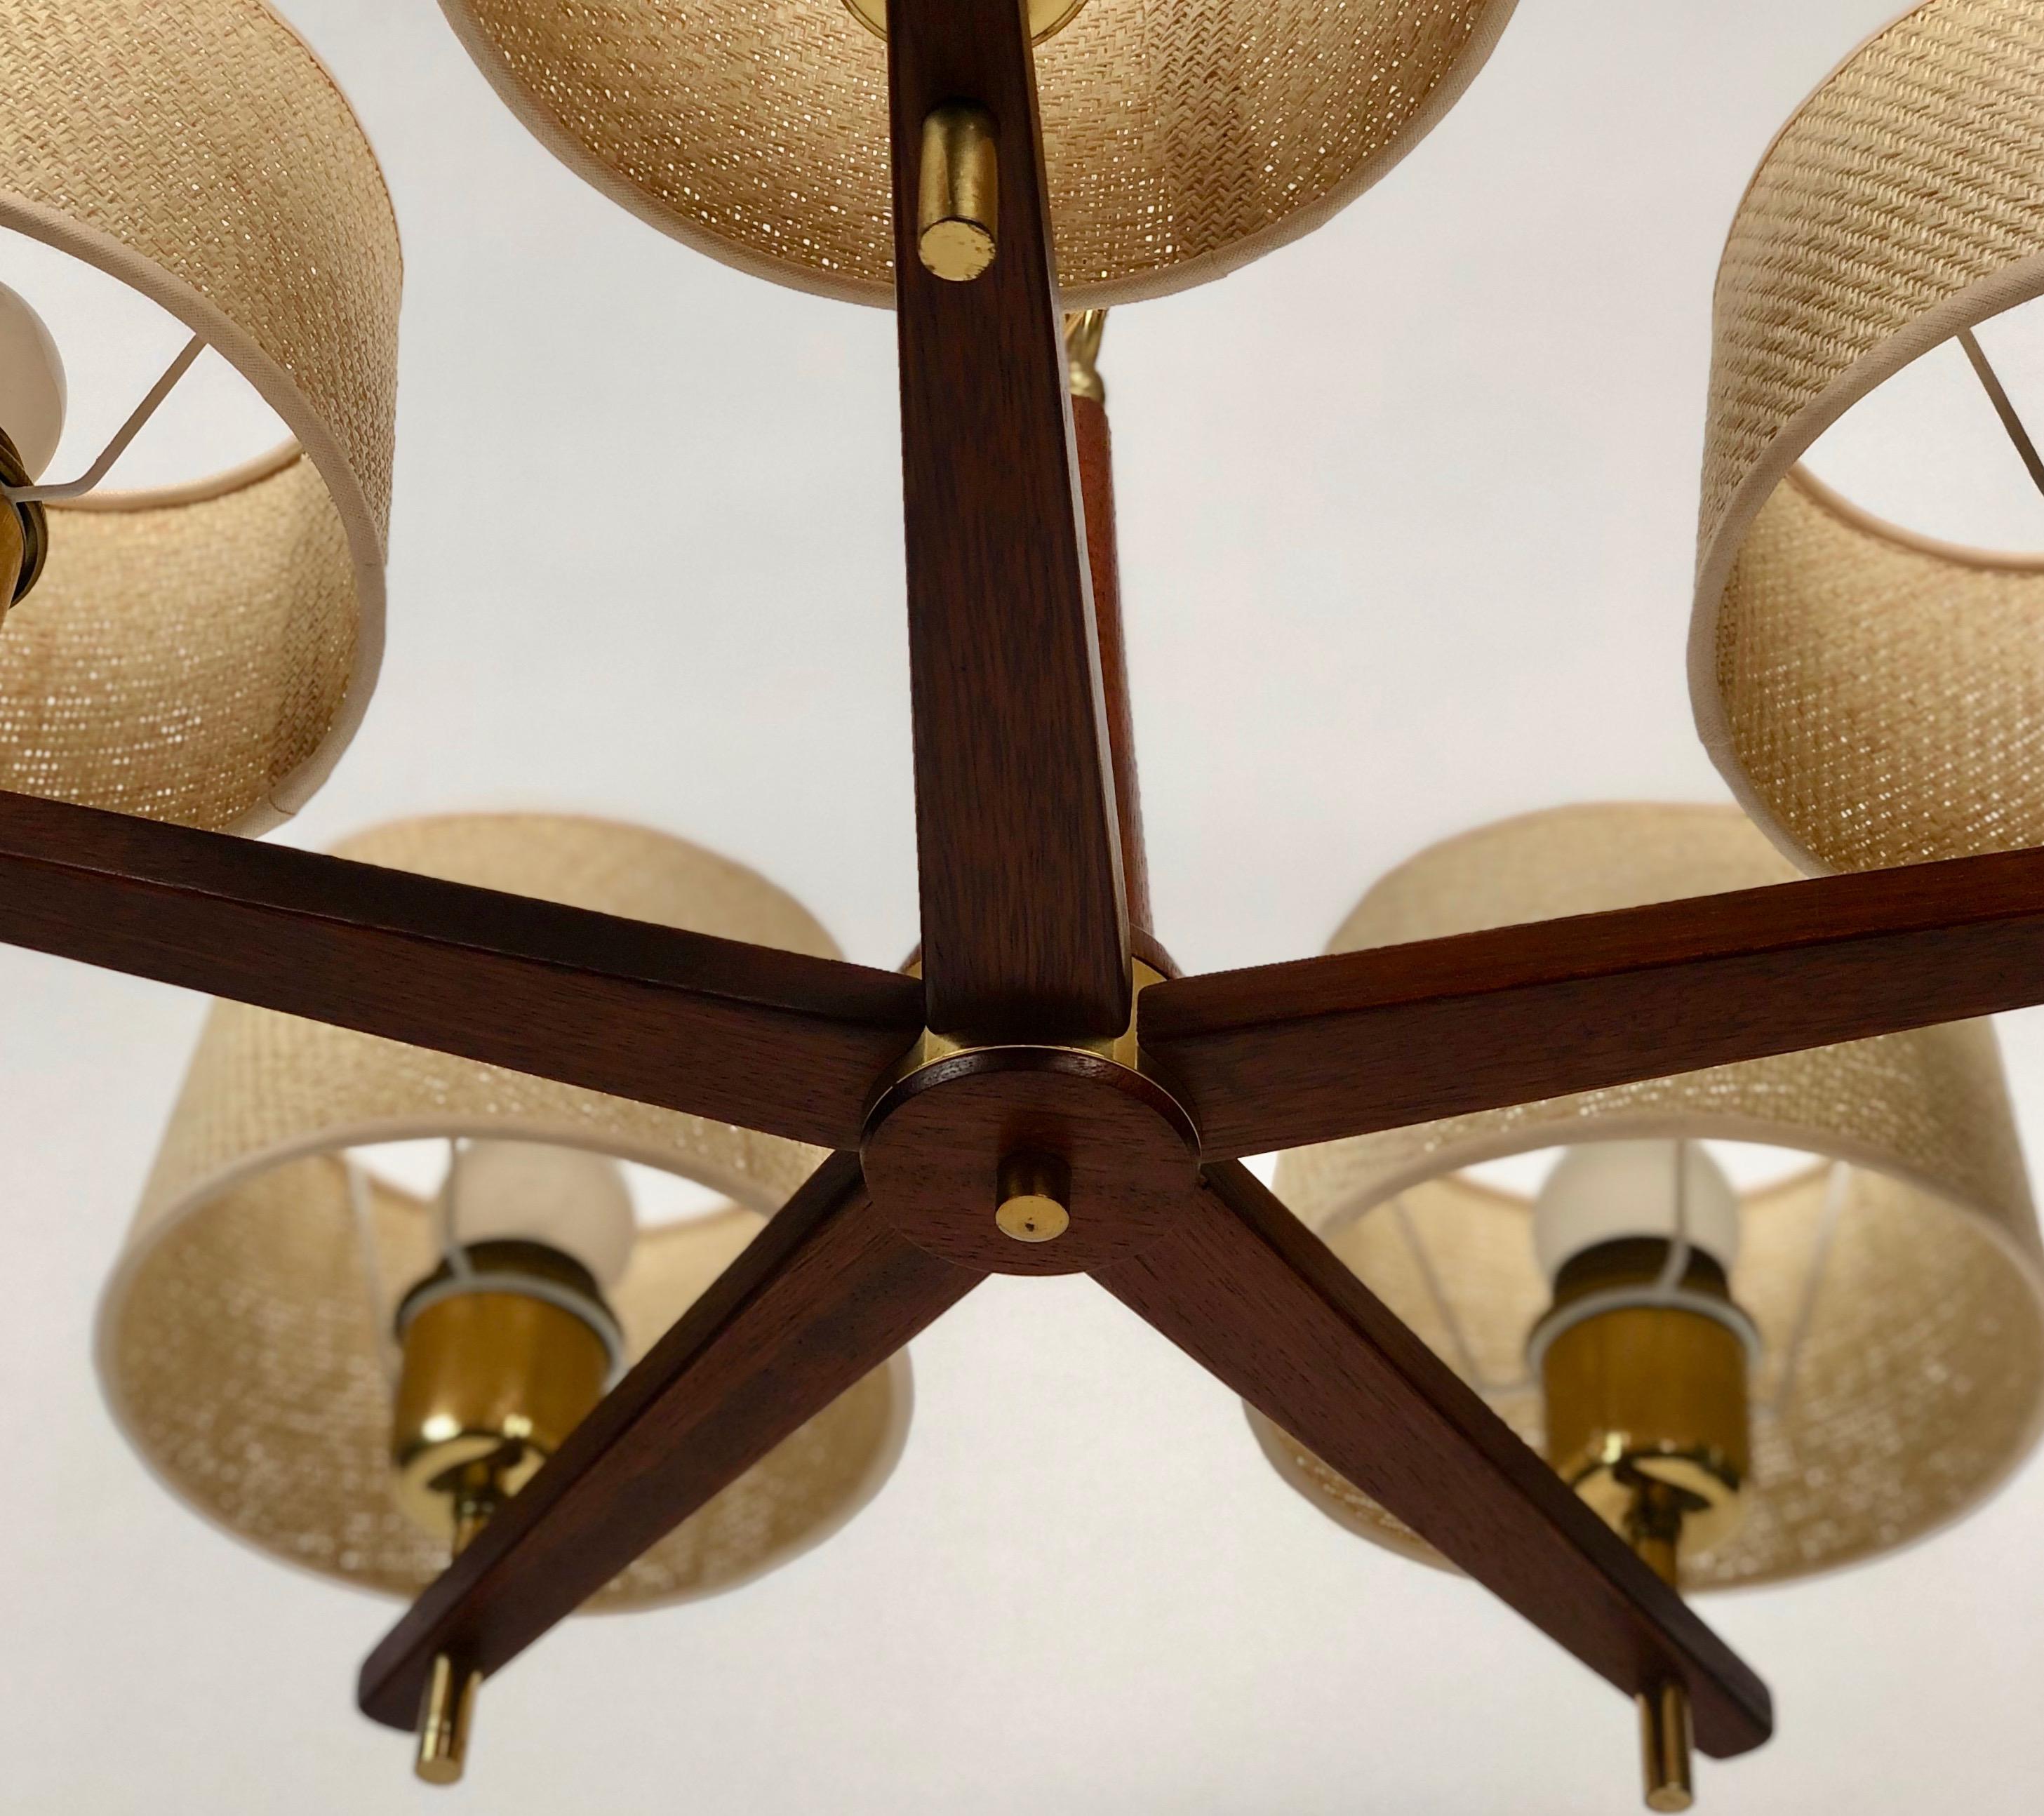 Polished Five Arms Chandelier in Teak Wood and Brass with Cane Shades, 1960, Austria For Sale